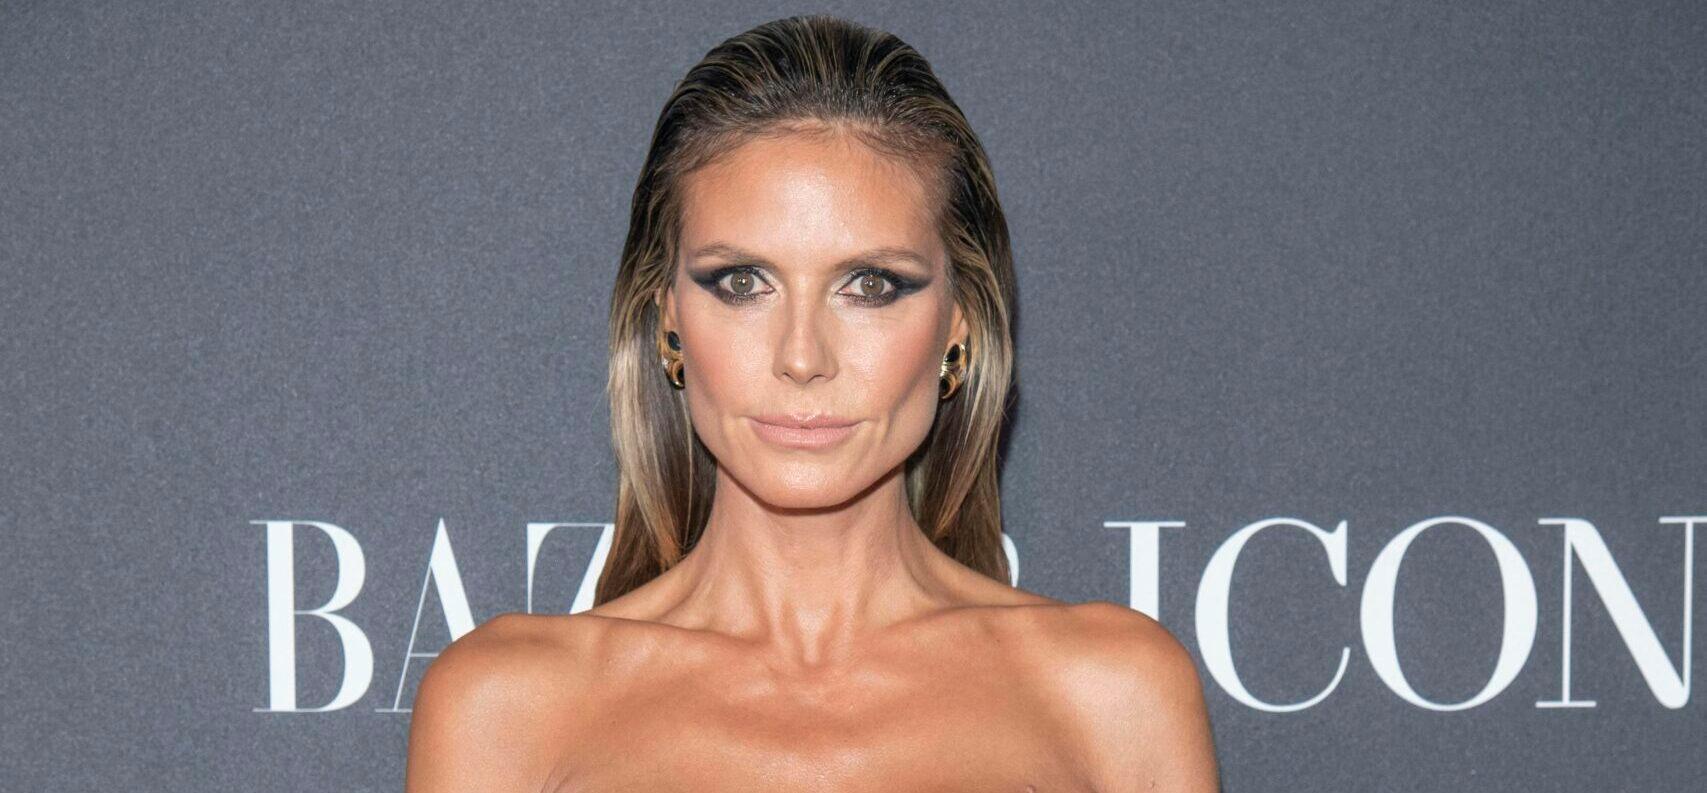 Heidi Klum Admits She Ditches Her Top To Avoid Tan Lines: ‘It’s Very Strategic’